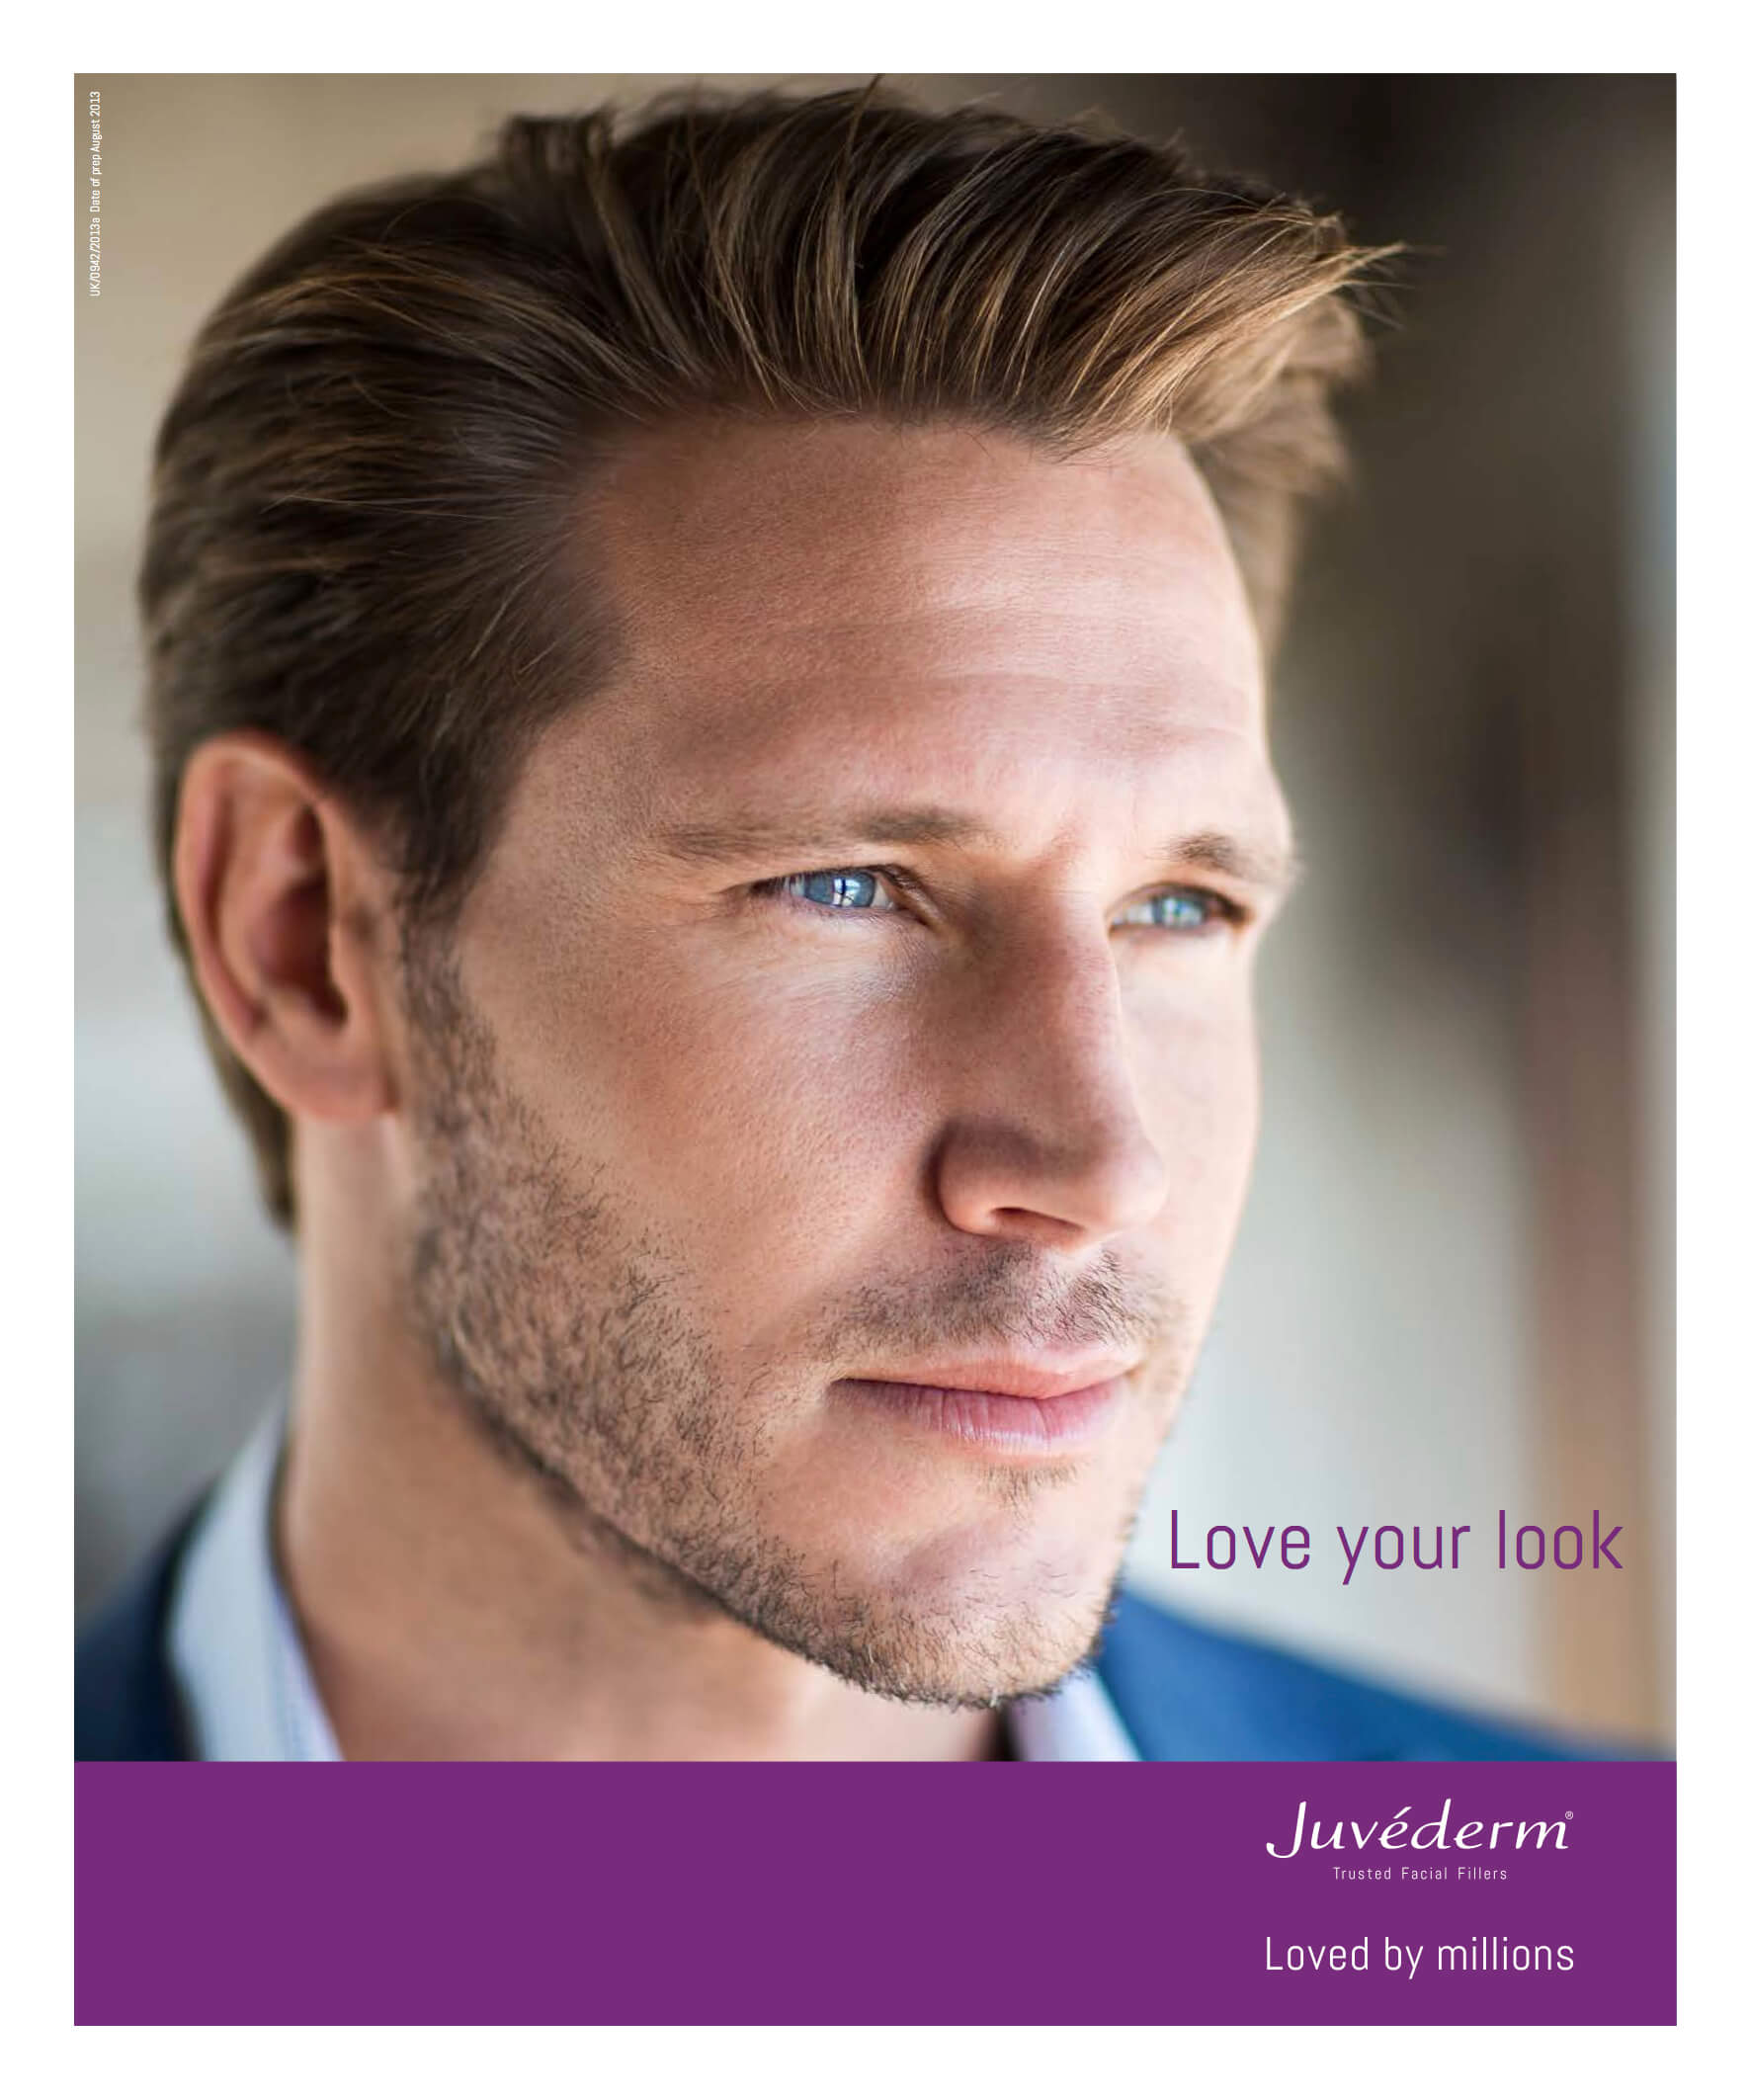 Gently ease the signs of ageing with Juvéderm® facial fillers. As we grow older, our skin loses moisture and elasticity and begins to show the signs of ageing. Juvéderm® facial fillers can gently ease wrinkles and add volume in a subtle way. Get back to the more natural you, with the Juvéderm® range of facial fillers, loved by millions worldwide.